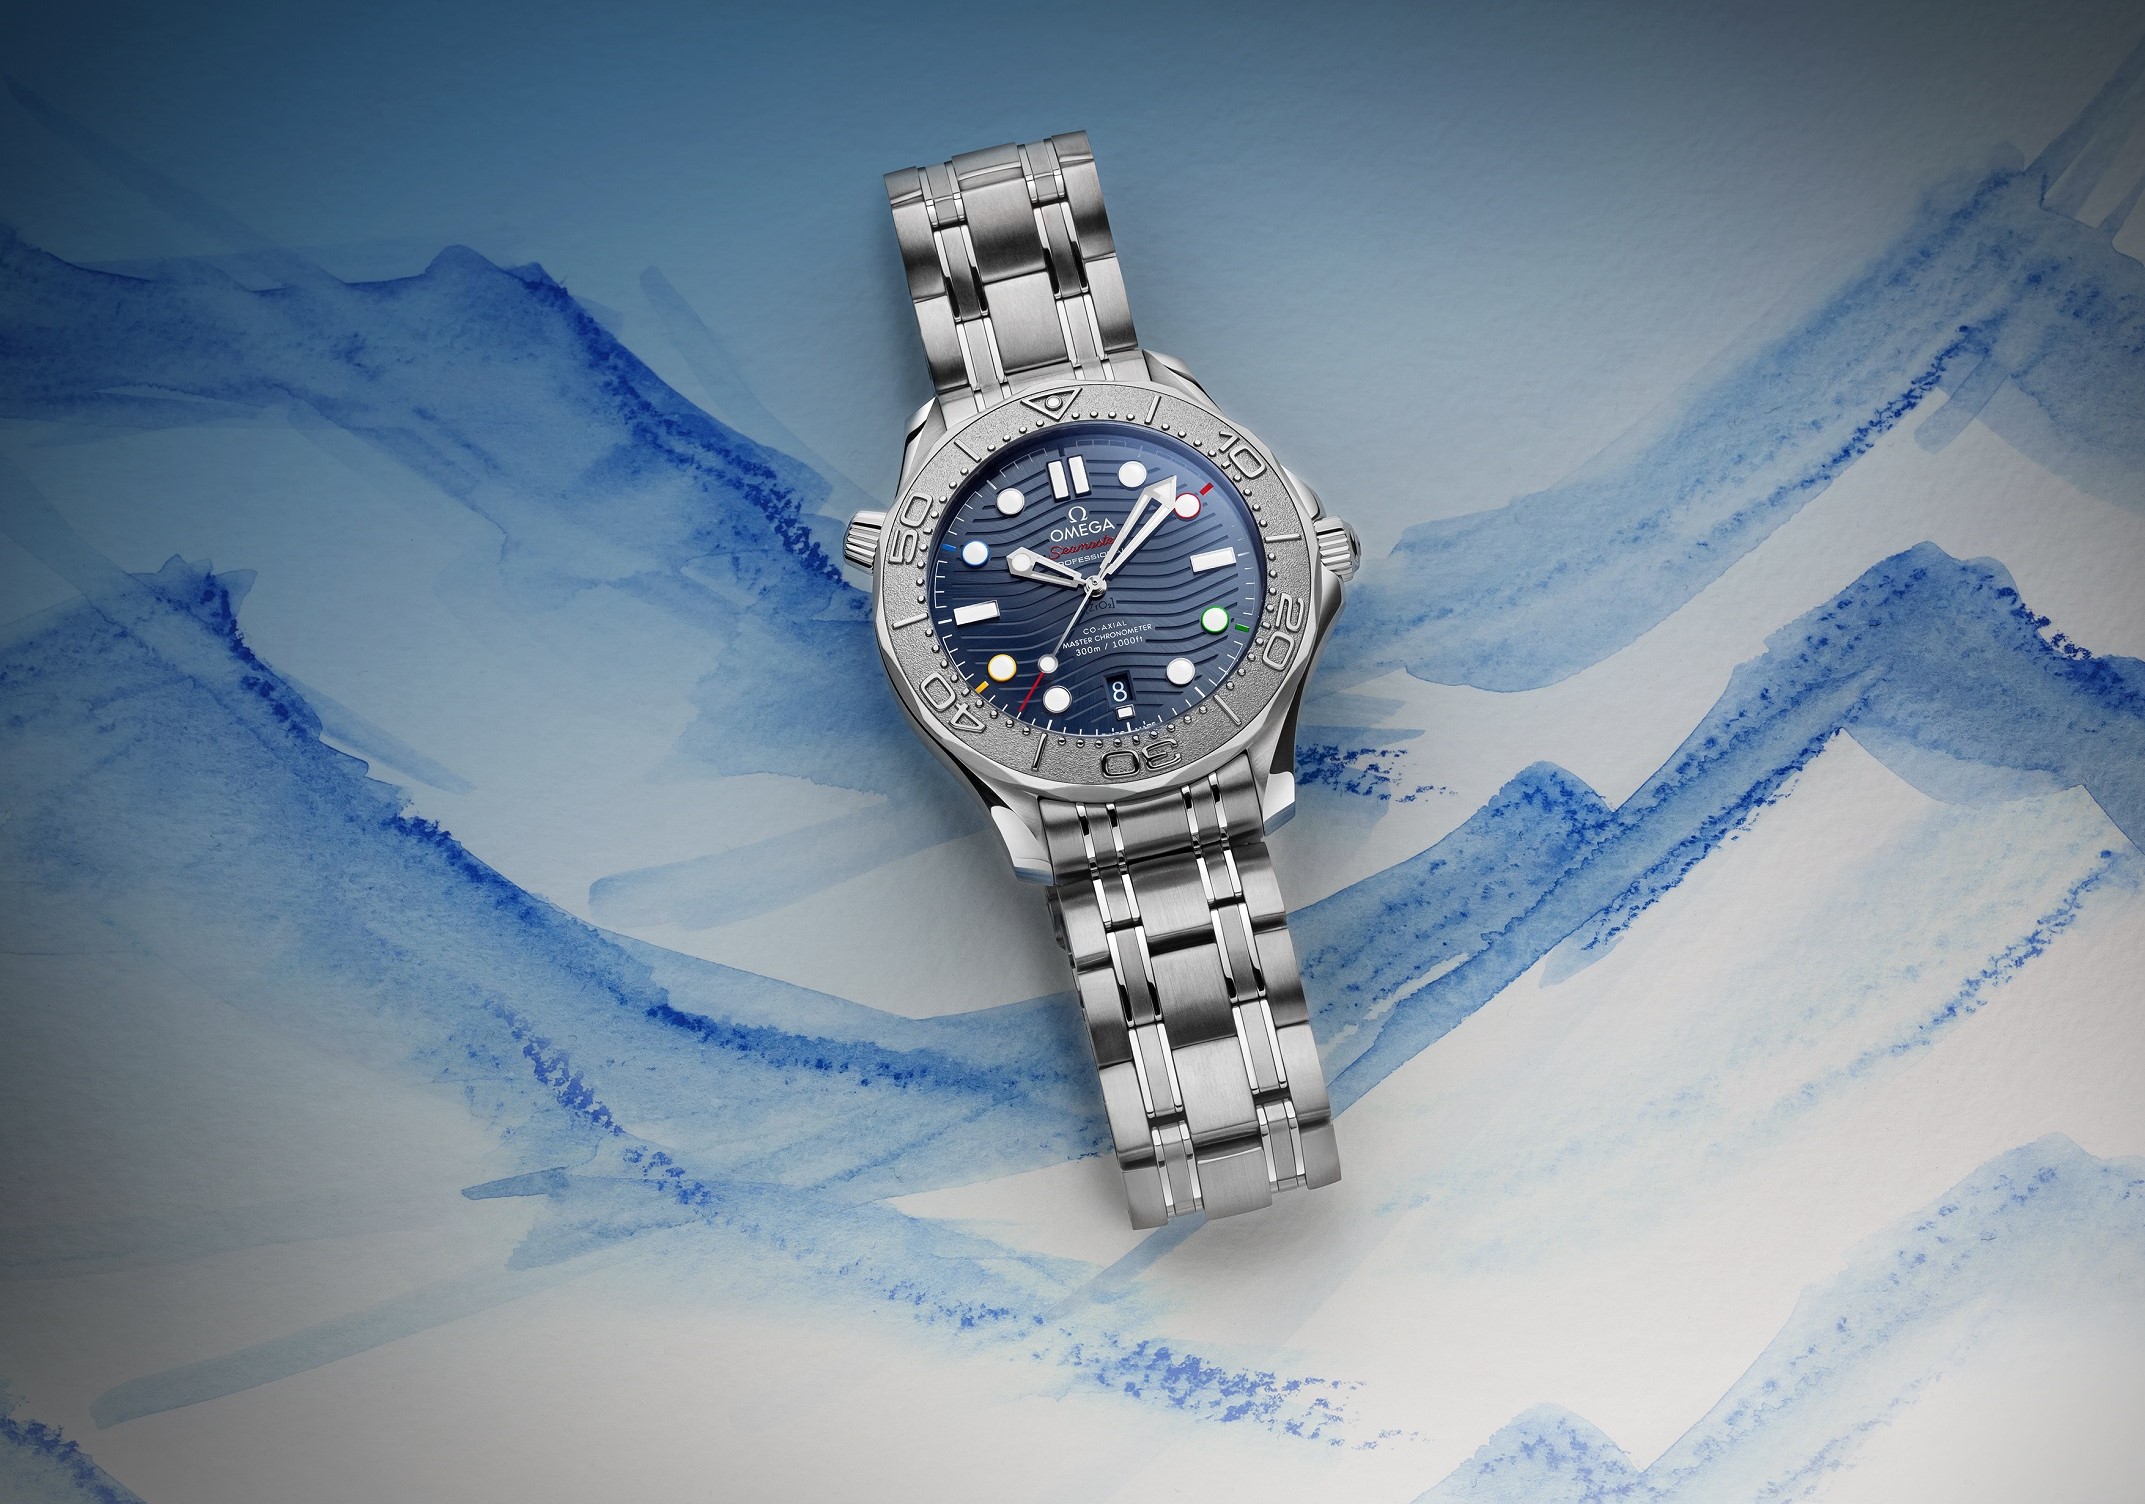 INTRODUCING THE OMEGA SEAMASTER DIVER 300M "BEIJING 2022" SPECIAL EDITION image